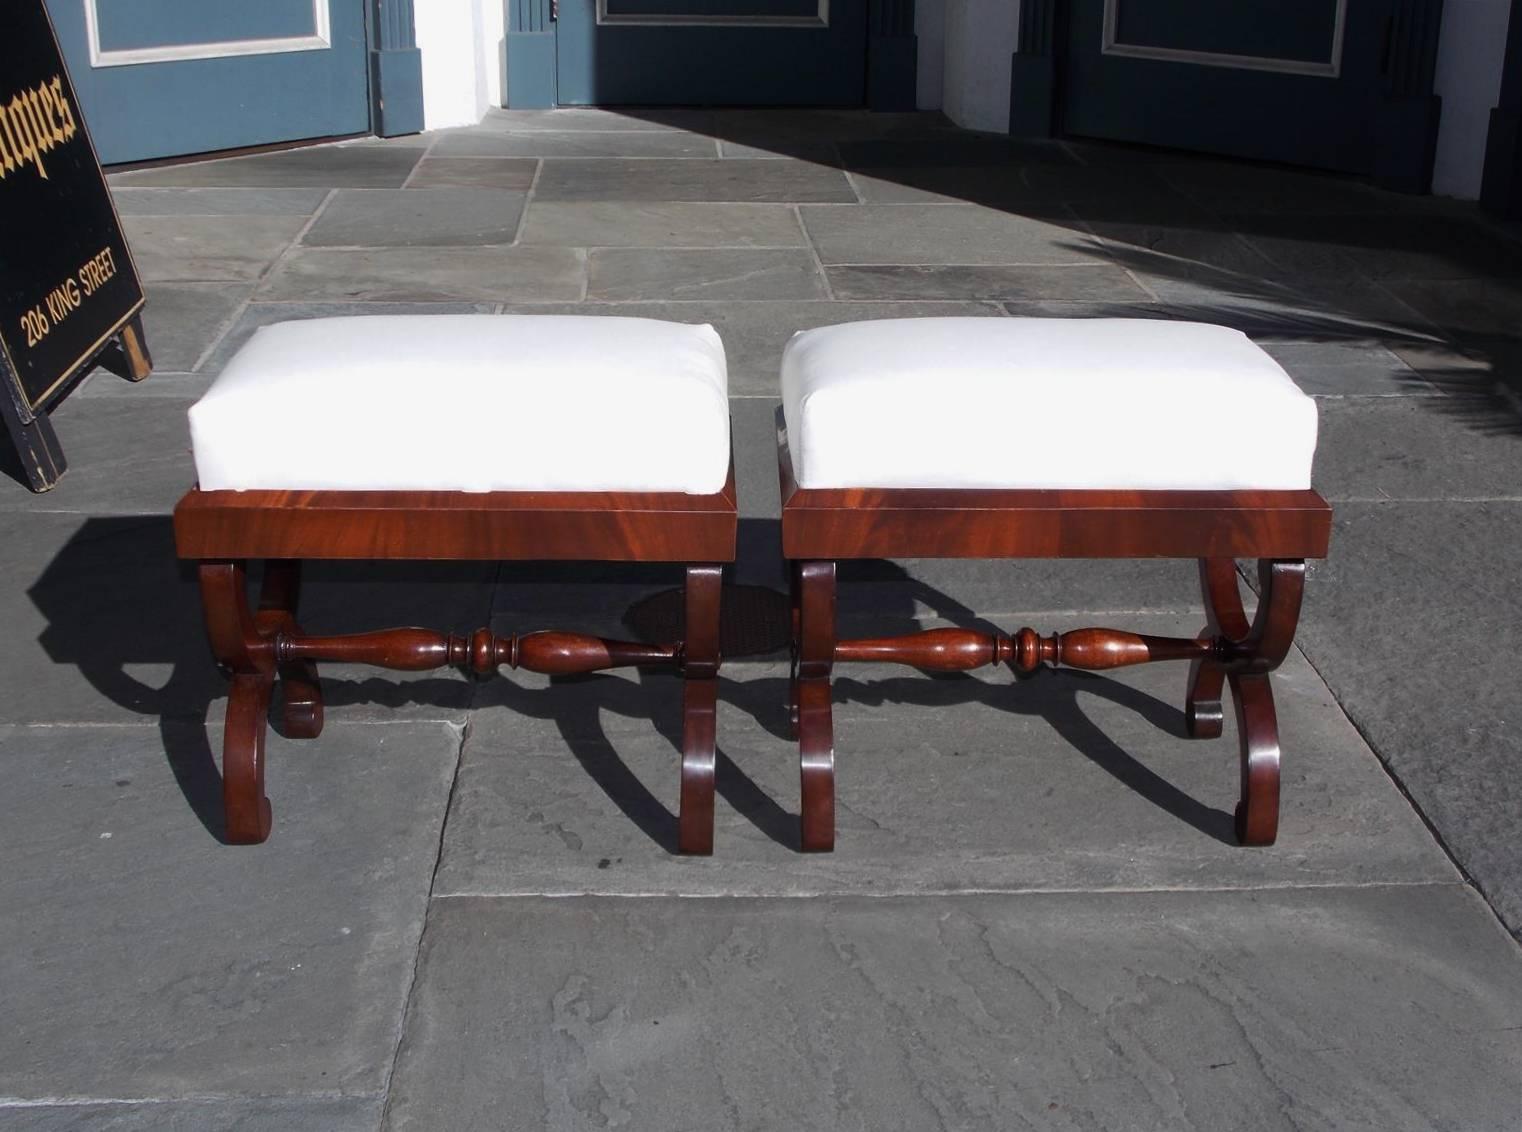 Pair of American Classical mahogany Curule stools with carved molded edges, turned bulbous stretchers and resting on scrolled flanking scrolled legs, Early 19th century. Stools are upholstered in white muslin.